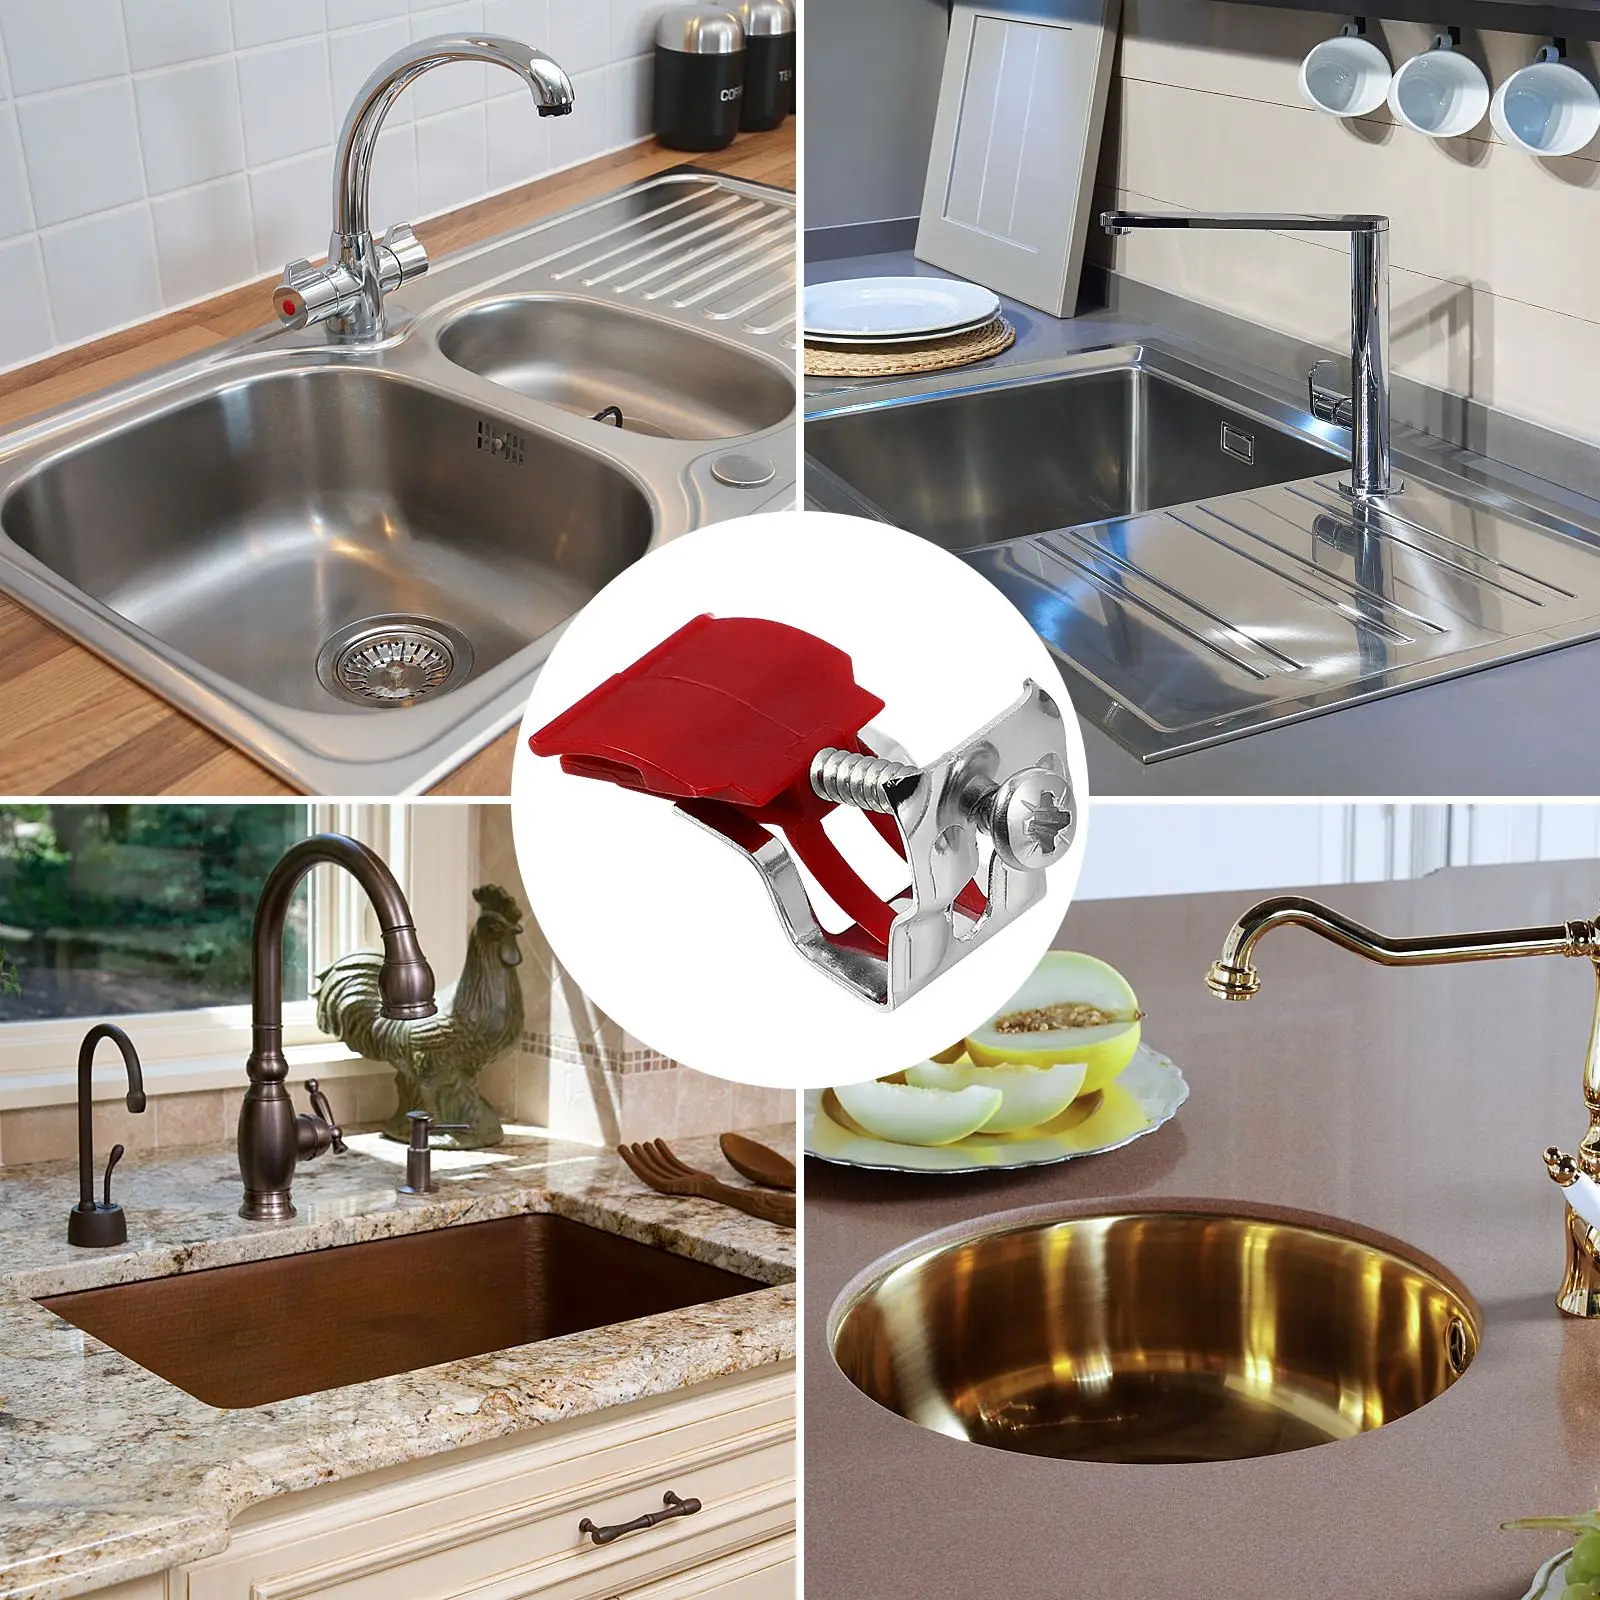 Sink Clips Mounting Kitchen Clip Installation Clamps Fixed Undermount Bracket Clamp Washbasin Accessories Support Refinishing